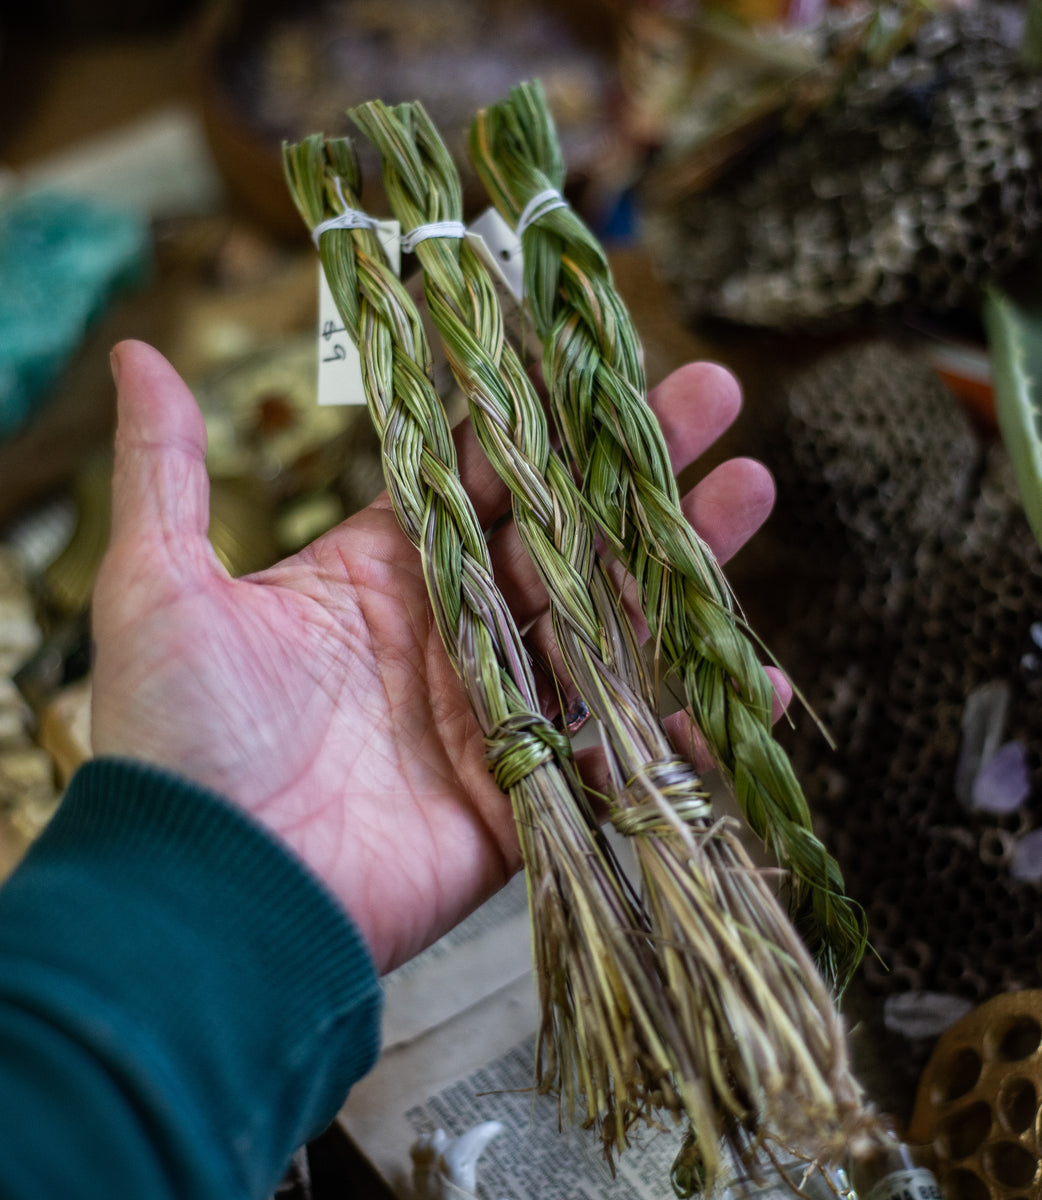 Where to Buy Braided Sweetgrass for Smudging